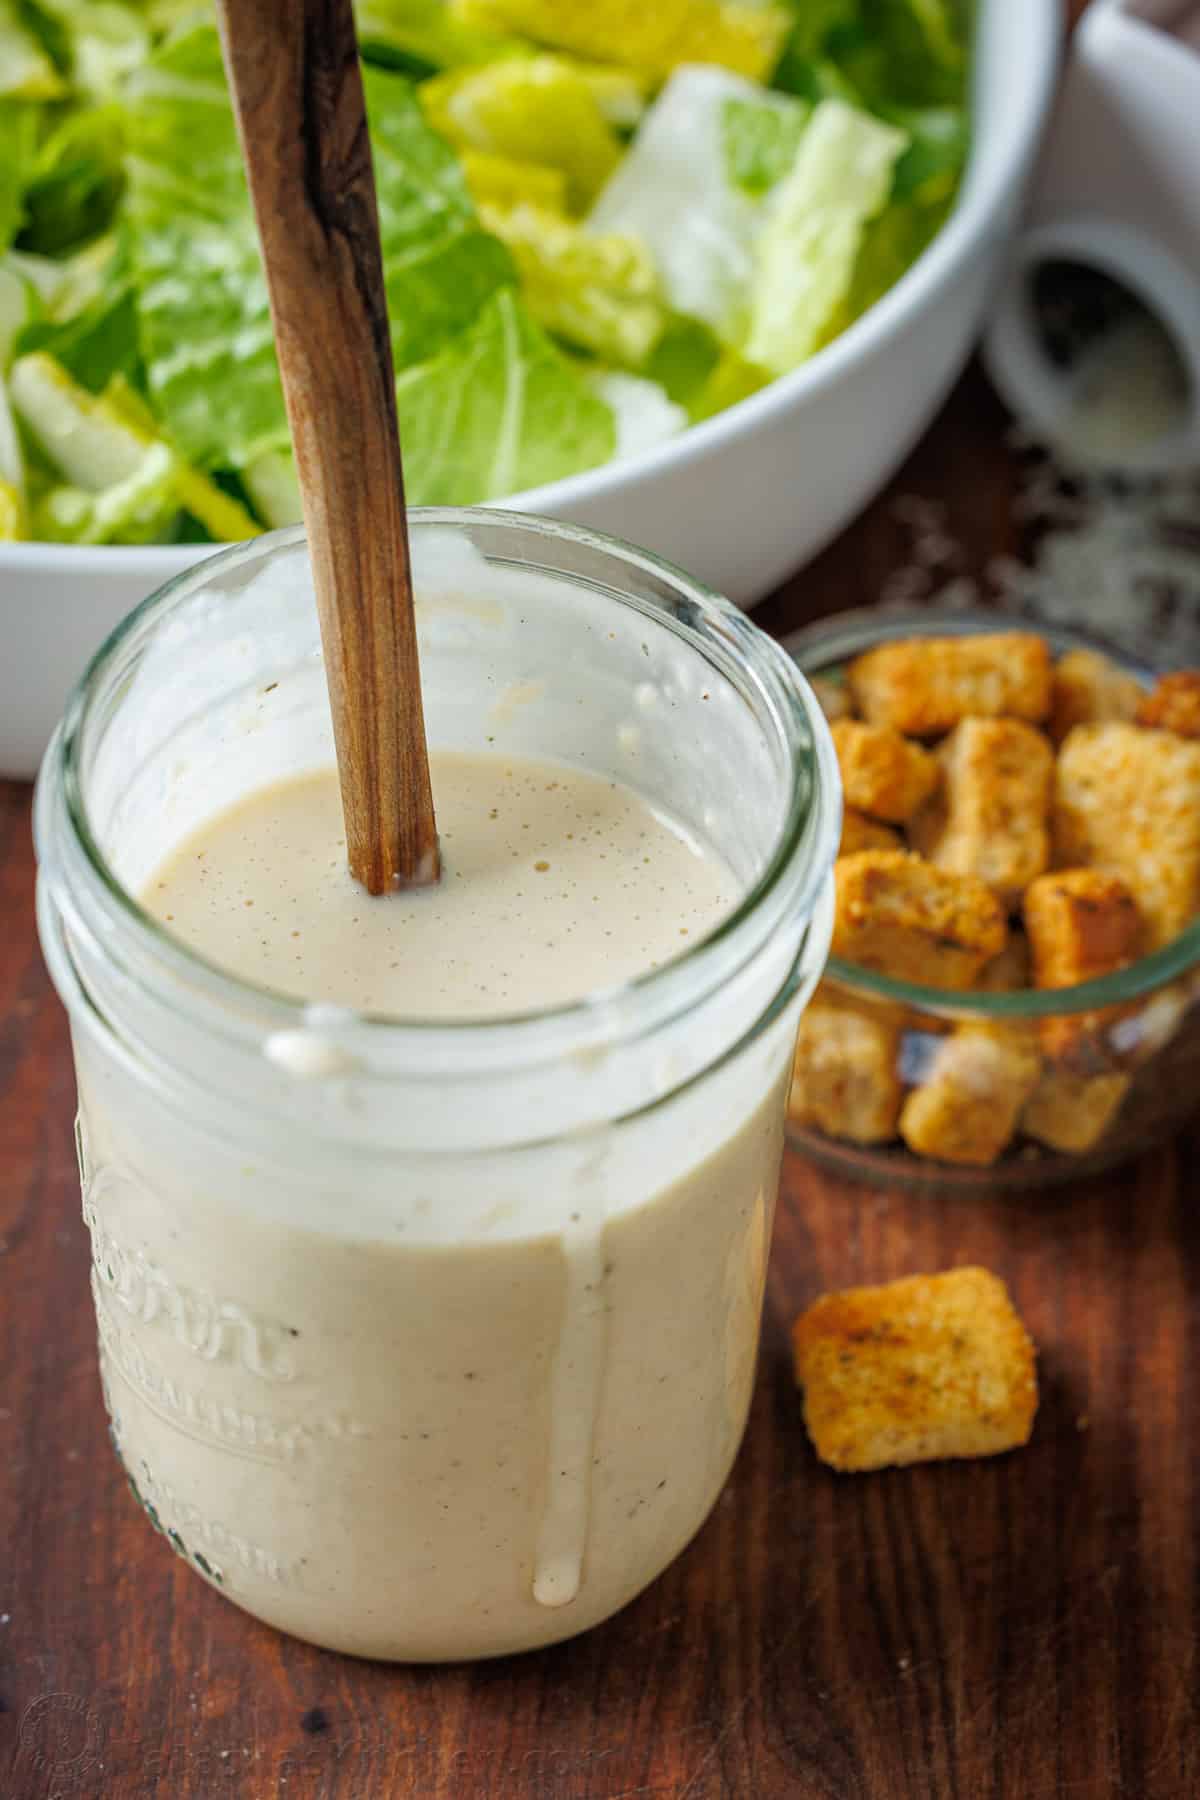 Homemade Caesar salad dressing in a jar with croutons and romaine lettuce